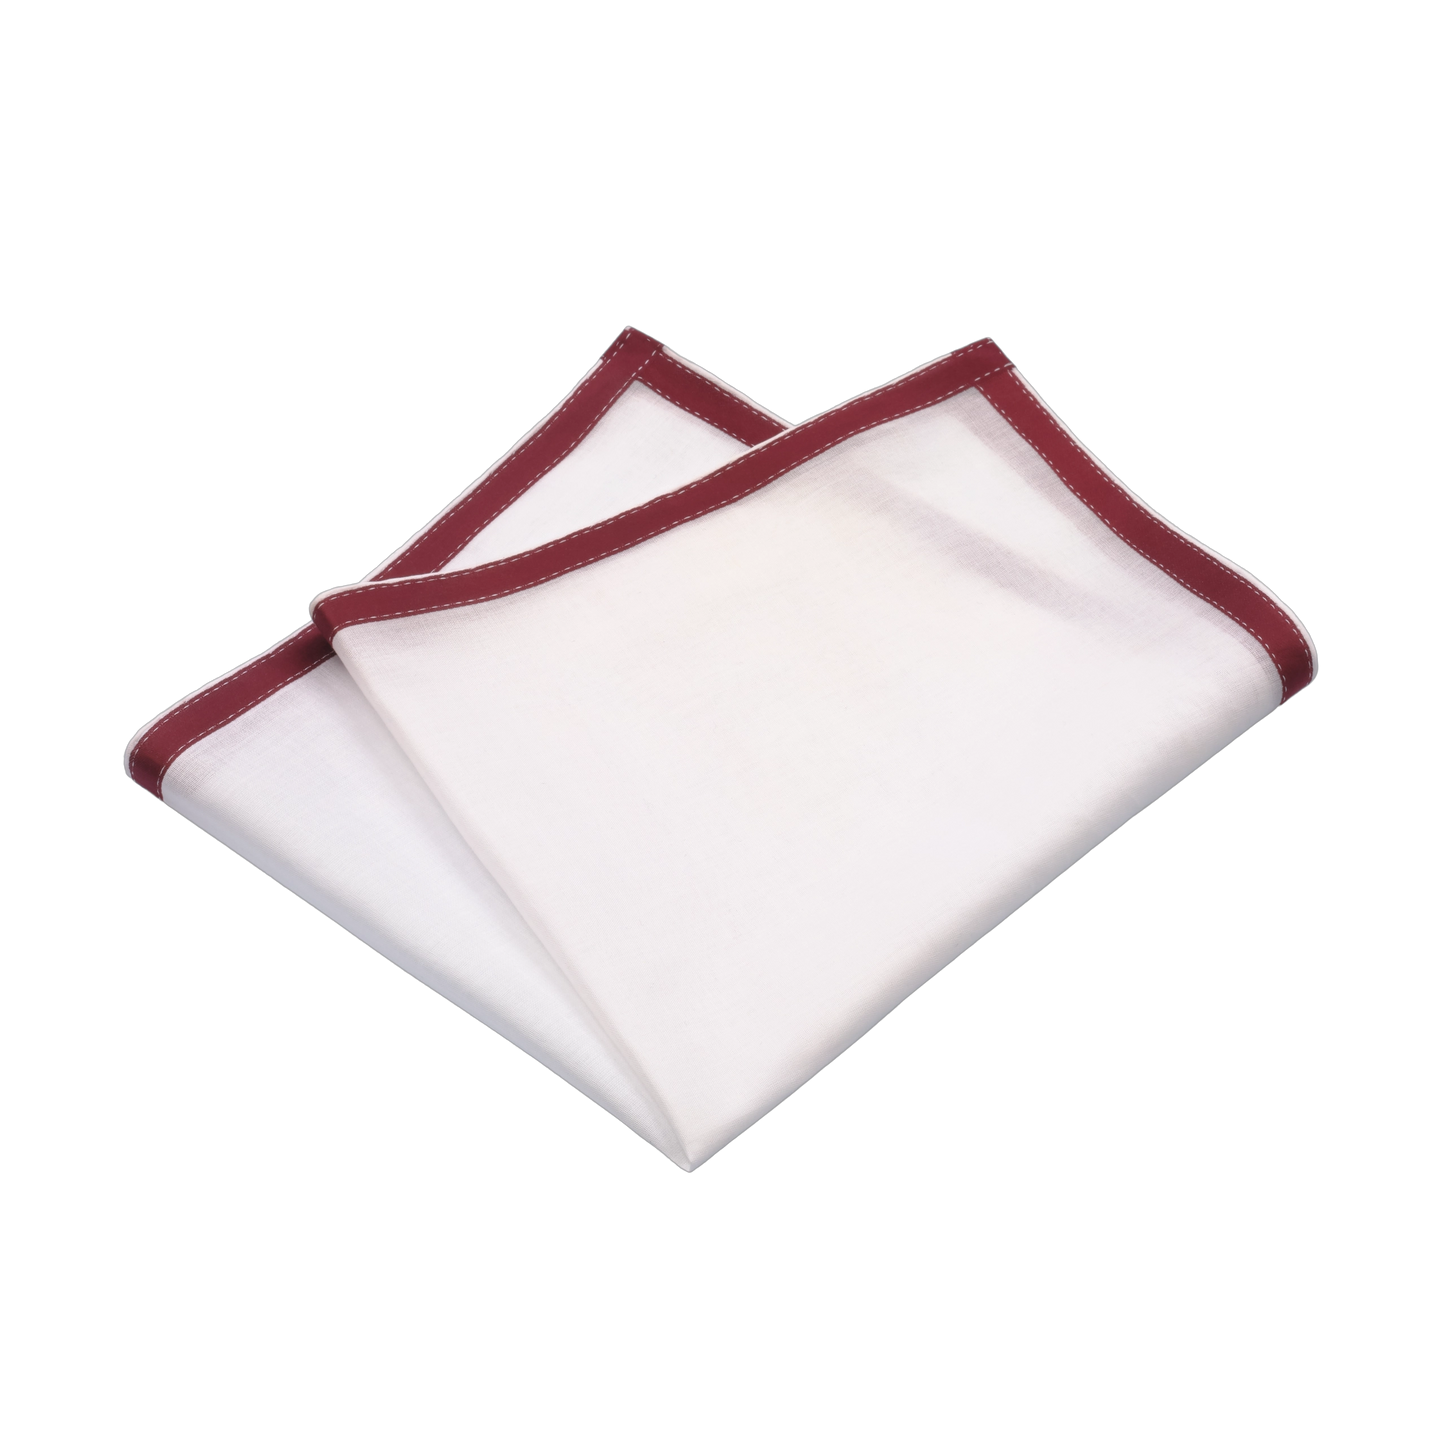 Cotton Pocket Square in White and Bordeaux